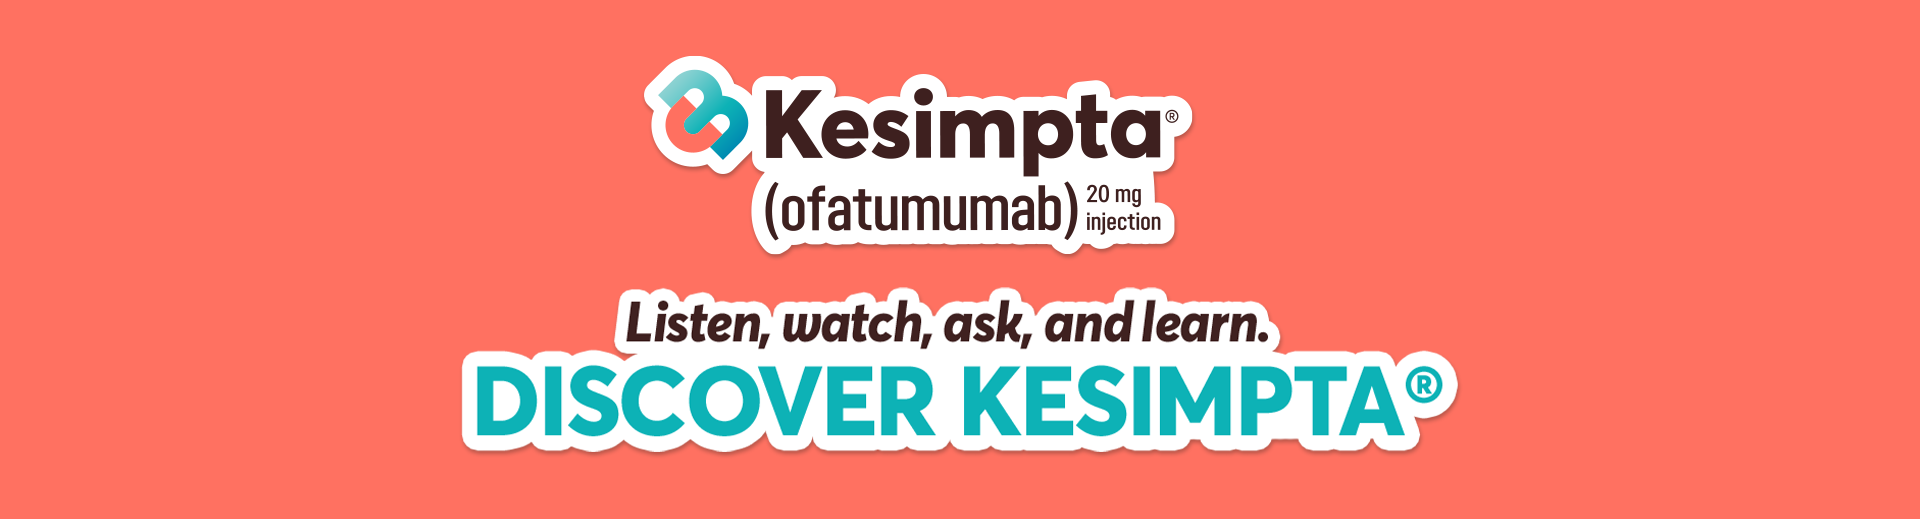 Discover Kesimpta; Listen, watch, ask and learn.